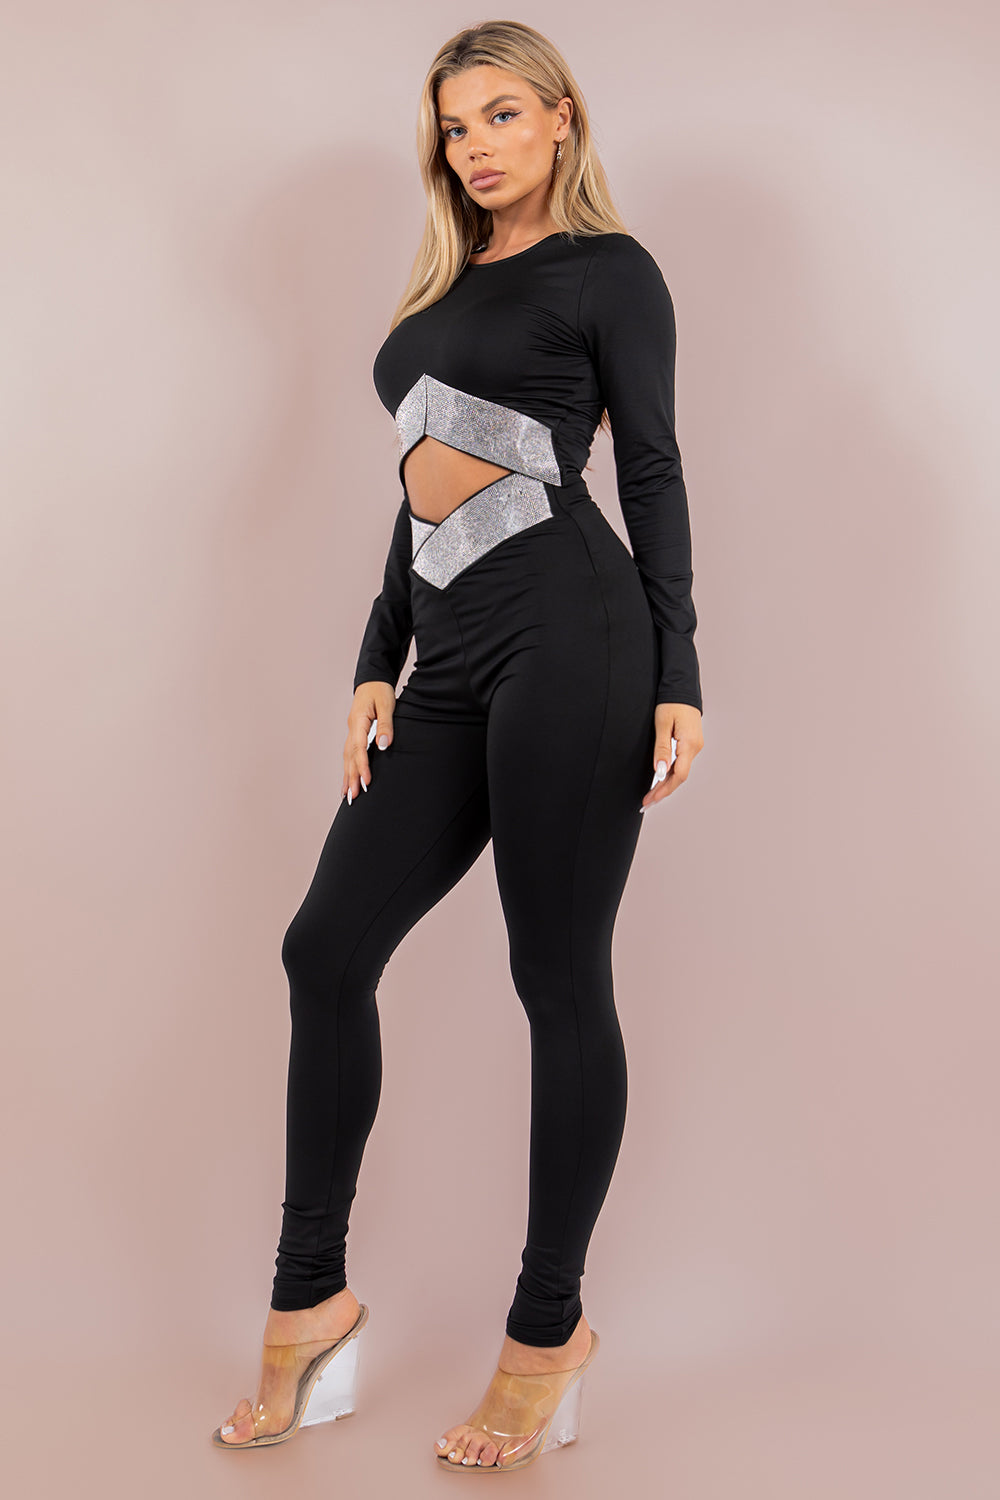 Asymmetrical Embellished Stretch Pant Set Long Sleeve Crop and Skinny Pants